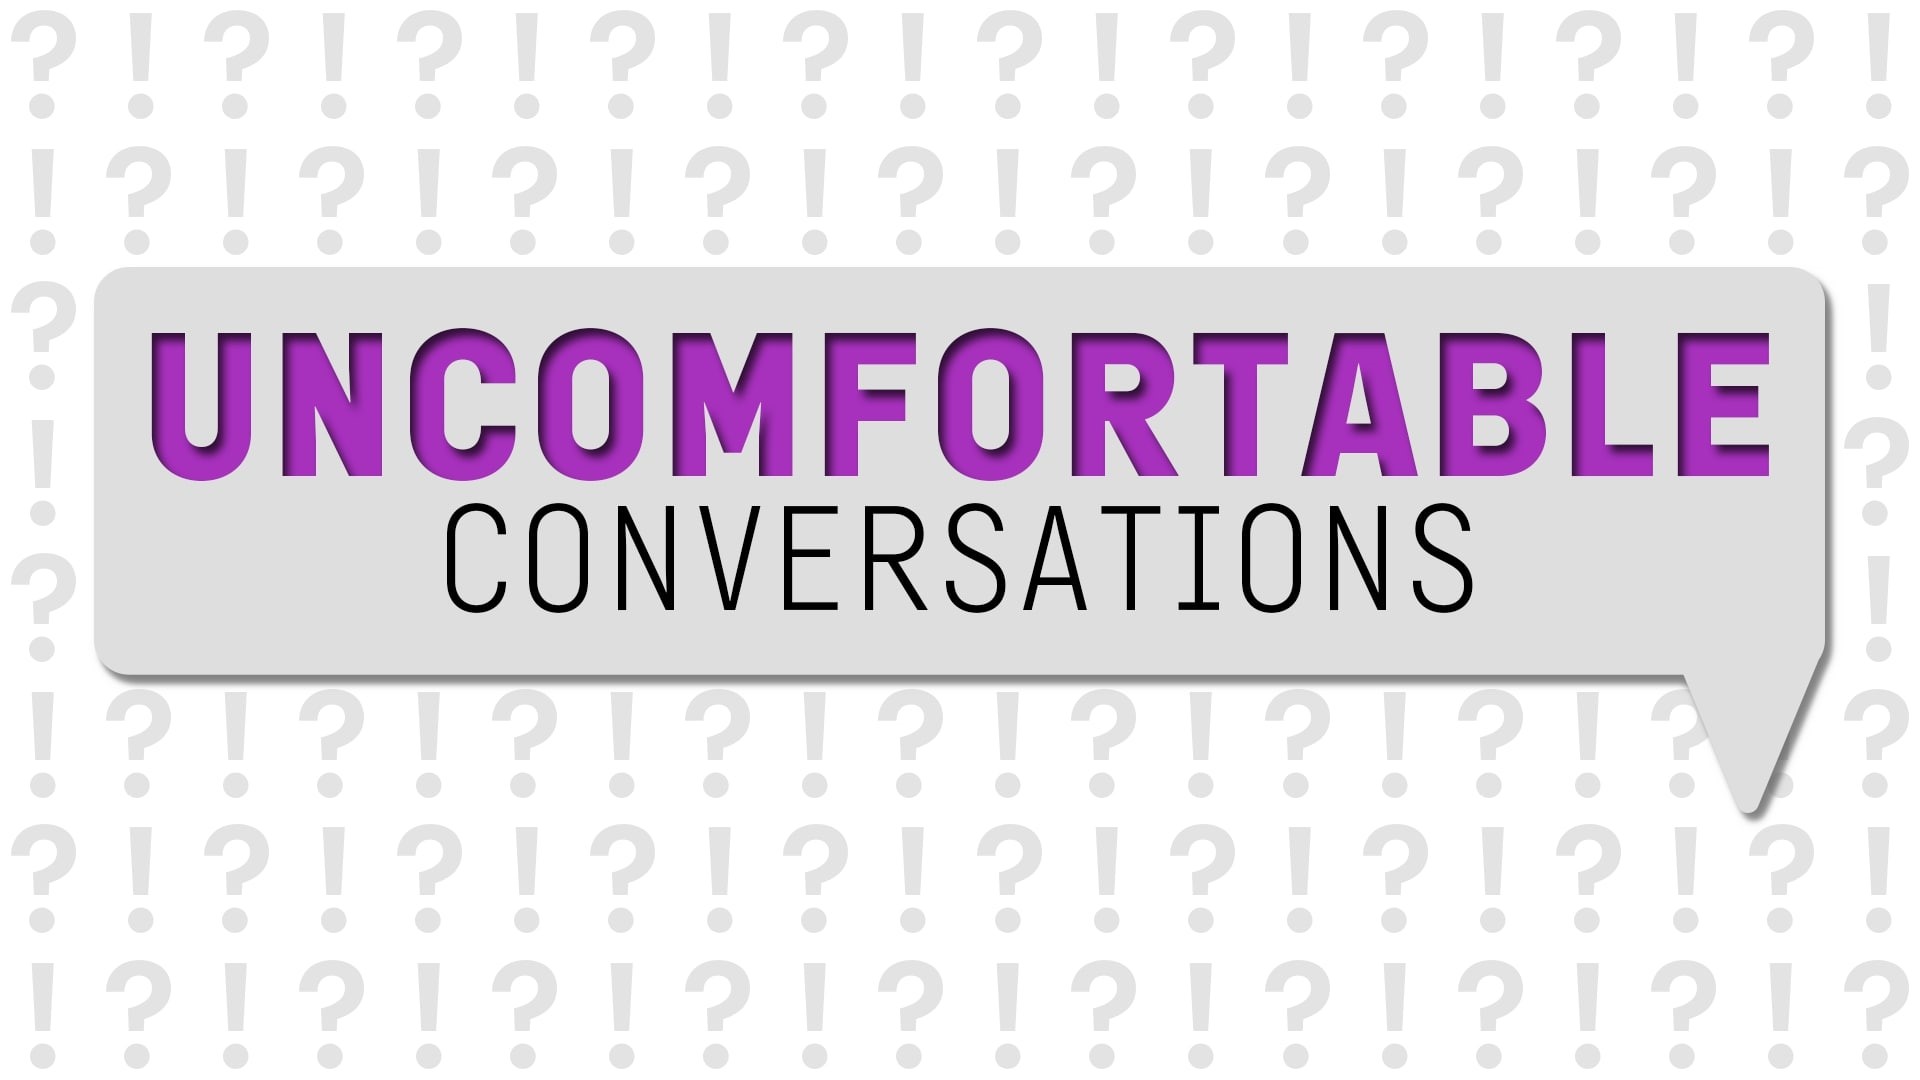 A group of Black interviewees discuss uncomfortable conversations about their culture and community.